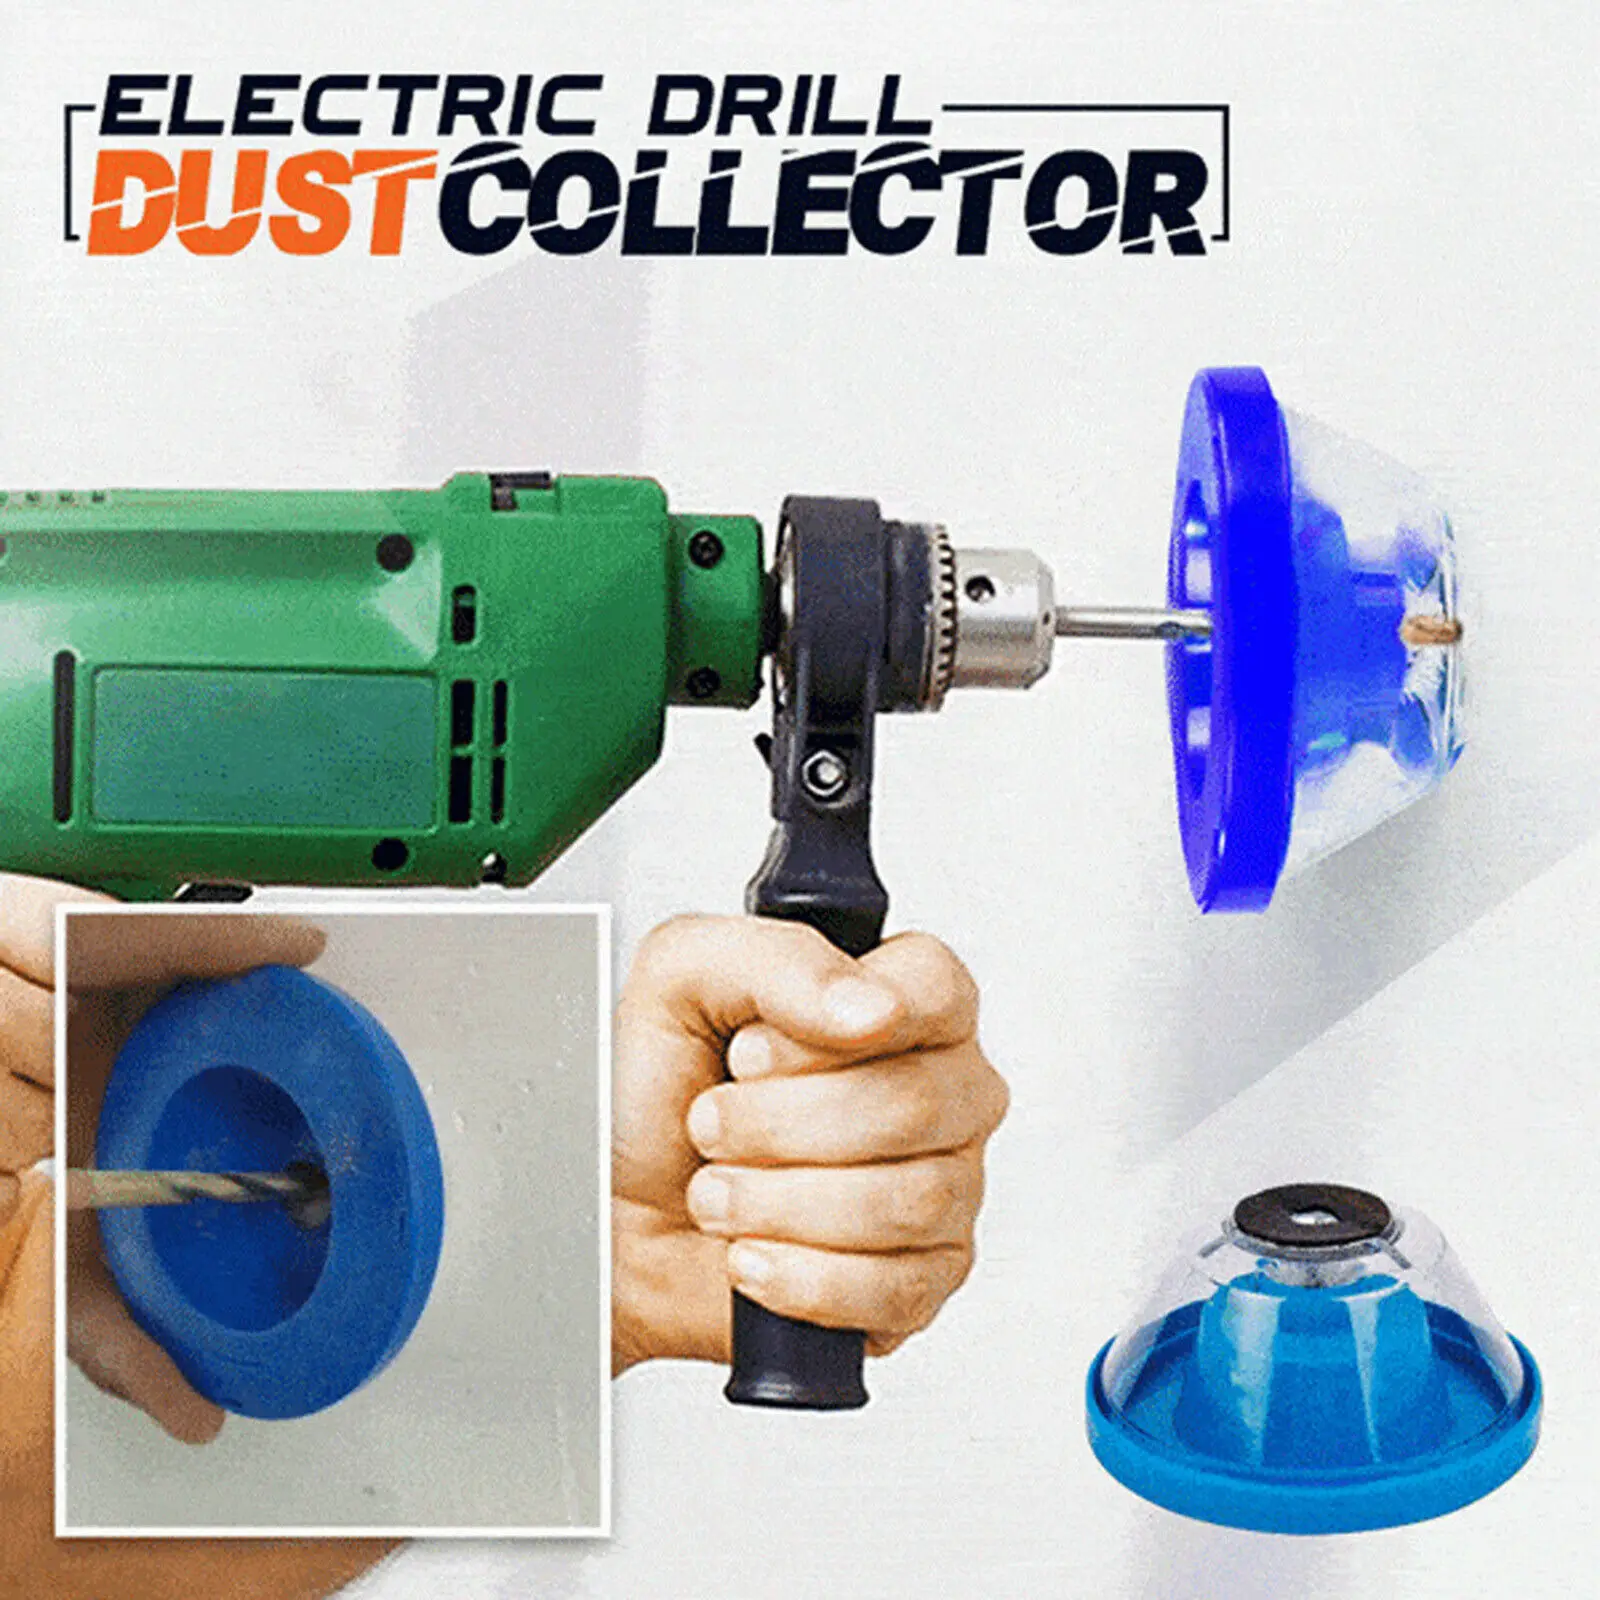 

ELECTRIC DRILL DUST COLLECTOR CATCHER ATTACHMENT DEBRIS BOX FITS MOST DRILLS DIAMETER 4-10mm MUST HAVE DRILLING ACCESSORY